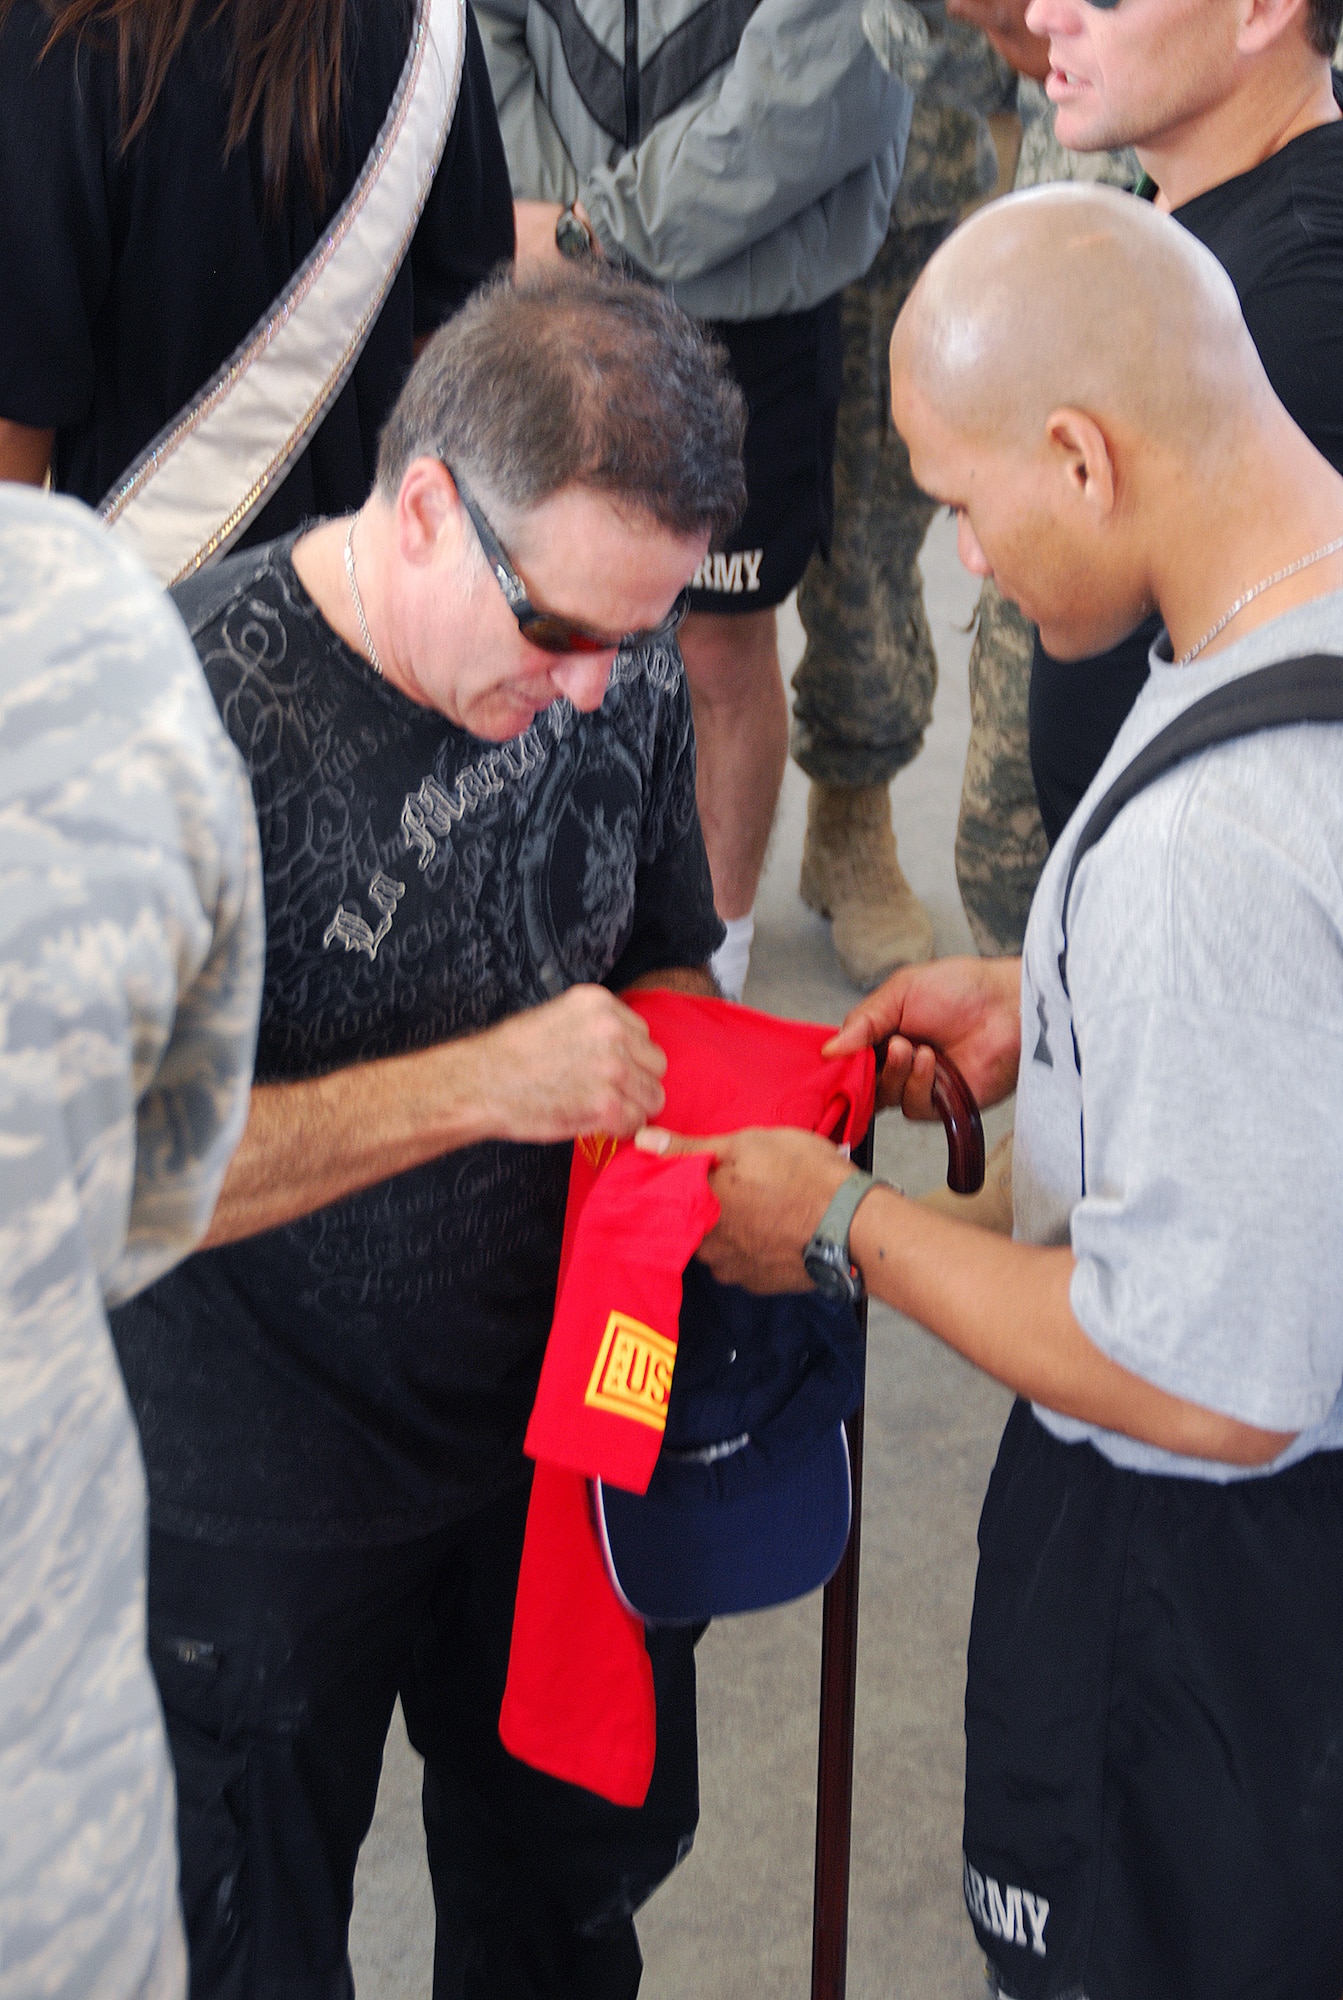 SOUTHWEST ASIA - Robin Williams signs a Tee shirt for U.S. Army Sergeant Semeli Toilolo during an appearance at a Southwest Asia air base Dec. 17. Sergeant Toilolo is recovering from wounds he received in a suicide bomber attack. Mr. Williams is touring with the USO as part of the 2007 holiday tour throughout Southwest Asia. Other celebrities on the tour included Rachel Smith, Miss USA, Kid Rock, Lewis Black and Lance Armstrong. (U. S. Air Force photo/Staff Sgt. Douglas Olsen)